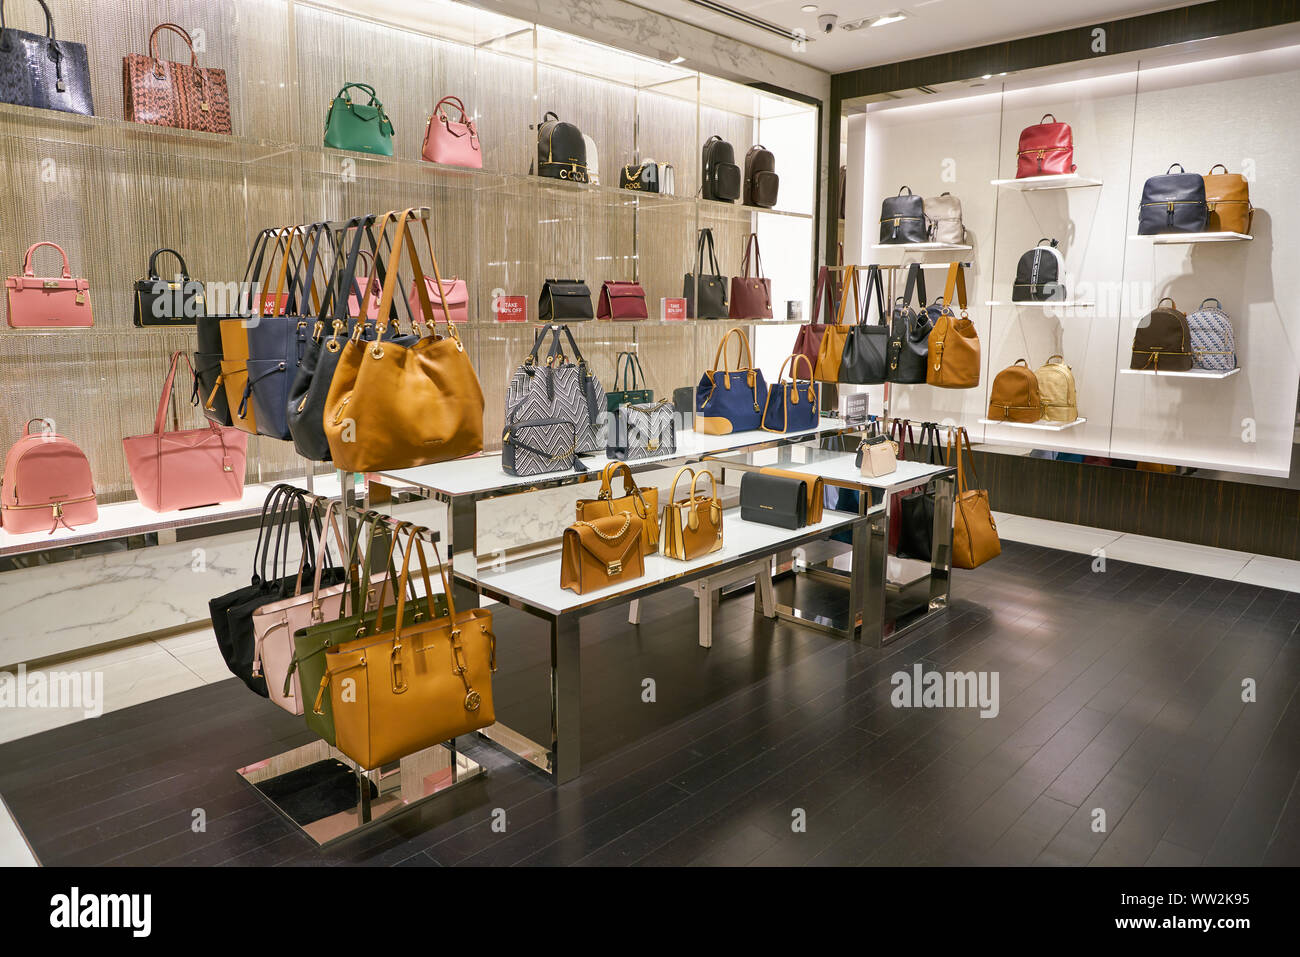 Michael Kors Outlet Stock Photo - Download Image Now - Airport